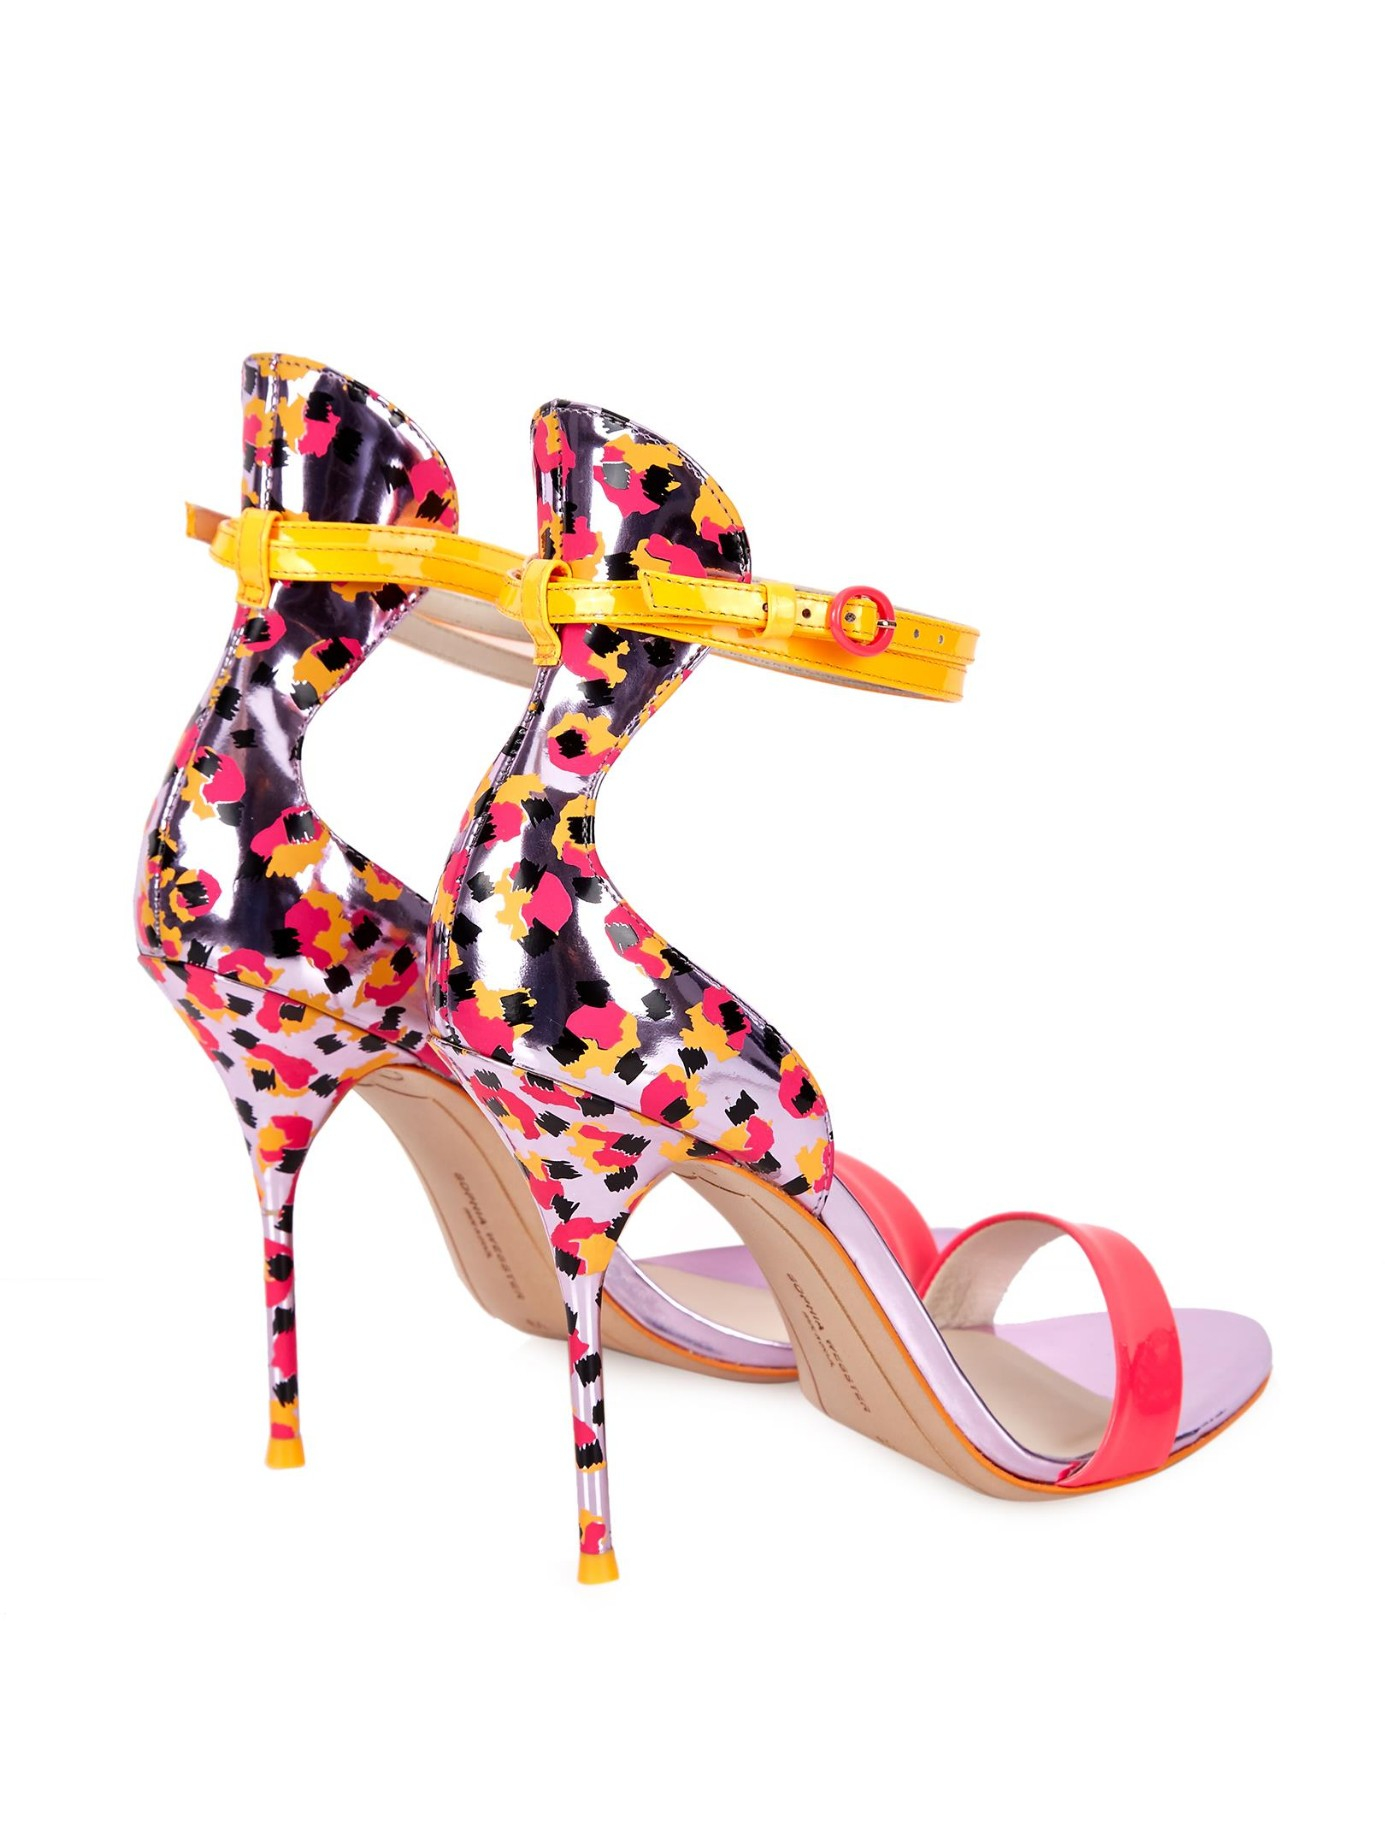 Sophia webster Nicole Sketch Camo Leather Sandals in Pink | Lyst